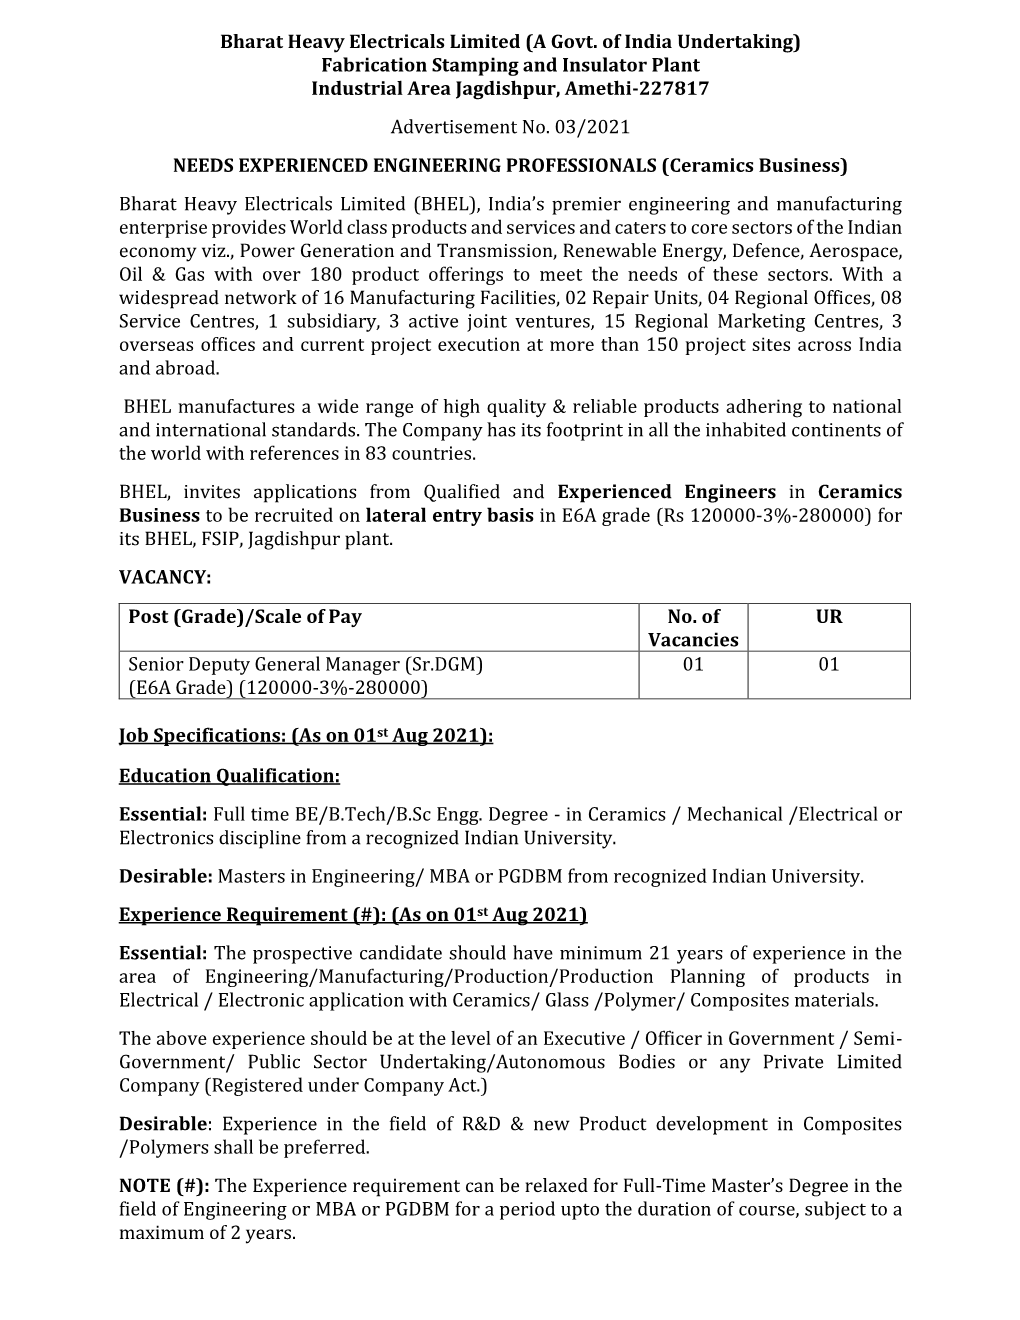 Bharat Heavy Electricals Limited (A Govt. of India Undertaking) Fabrication Stamping and Insulator Plant Industrial Area Jagdishpur, Amethi-227817 Advertisement No